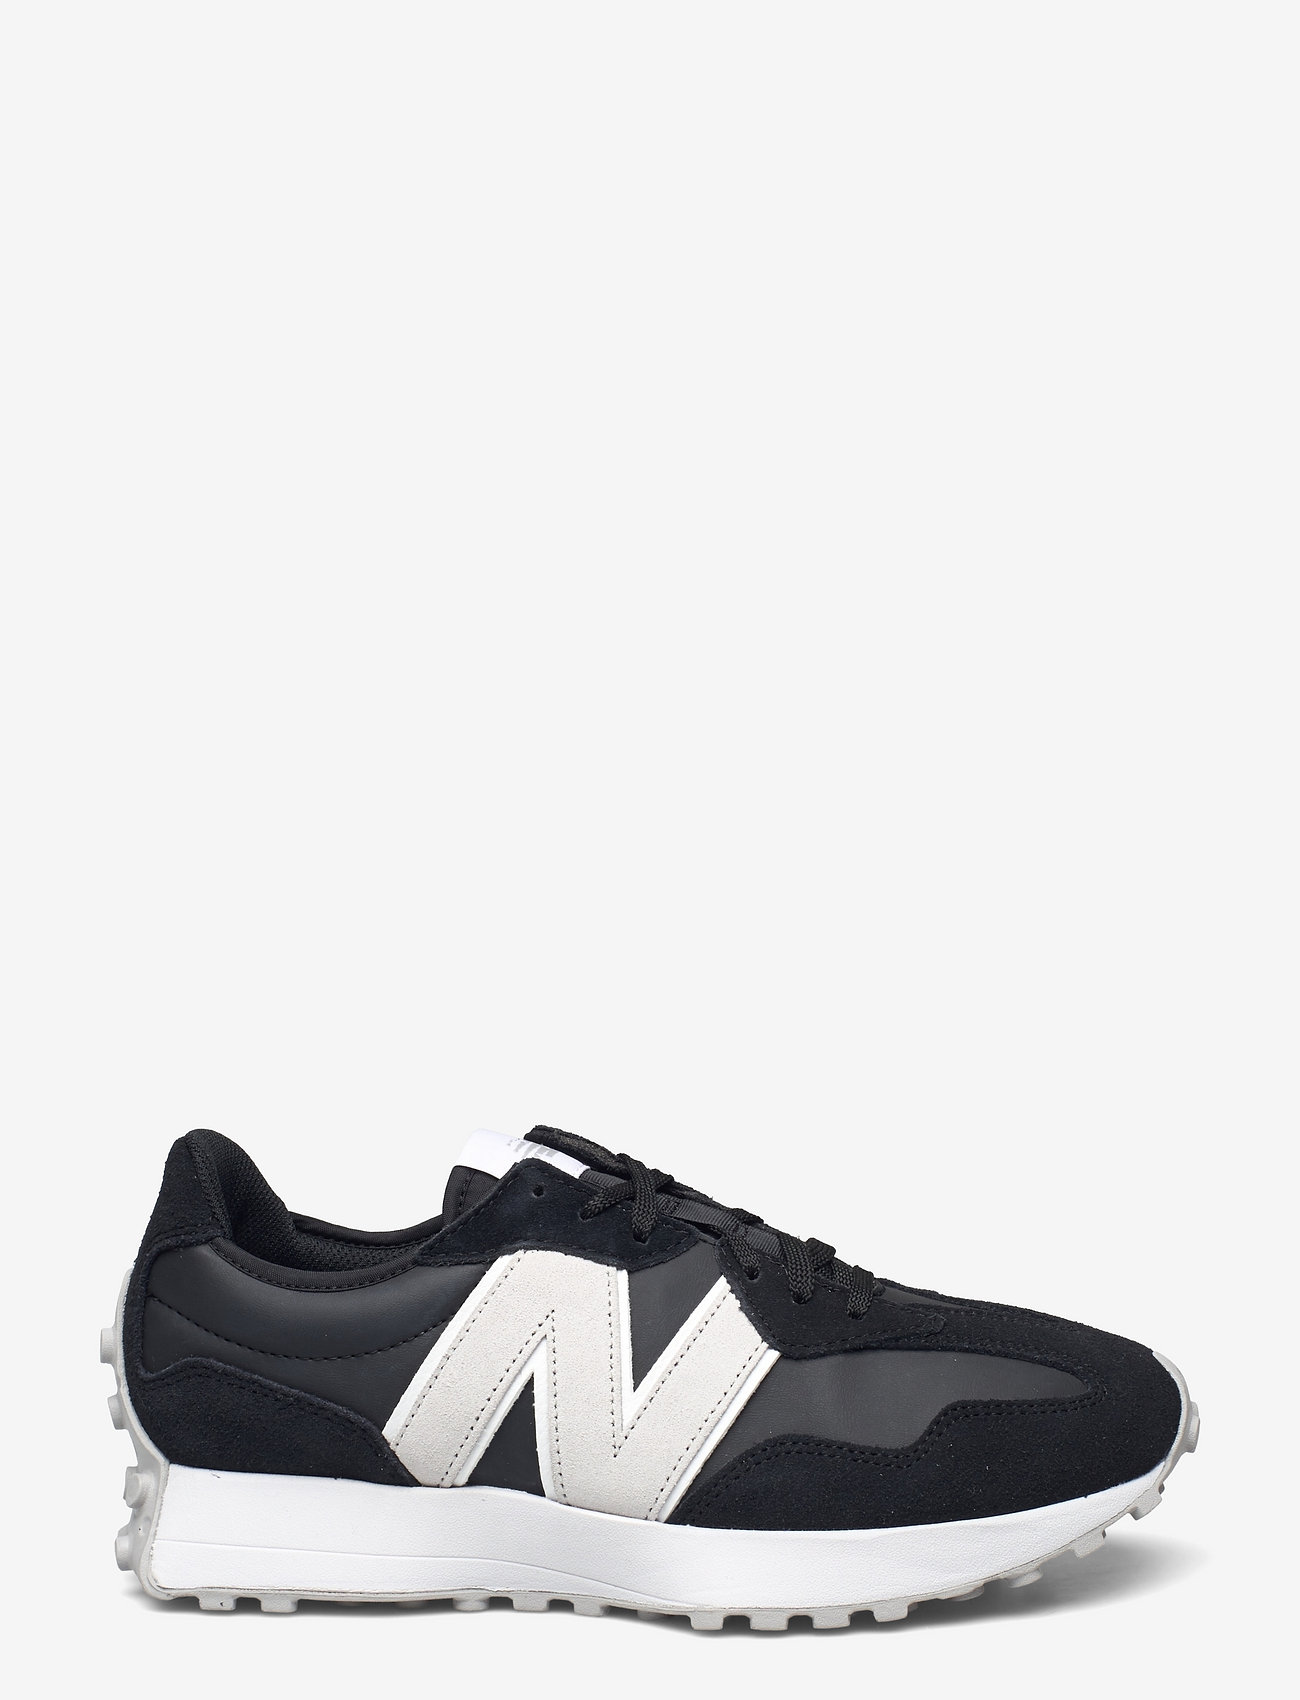 New Balance Ws327lw - Low top sneakers | Boozt.com